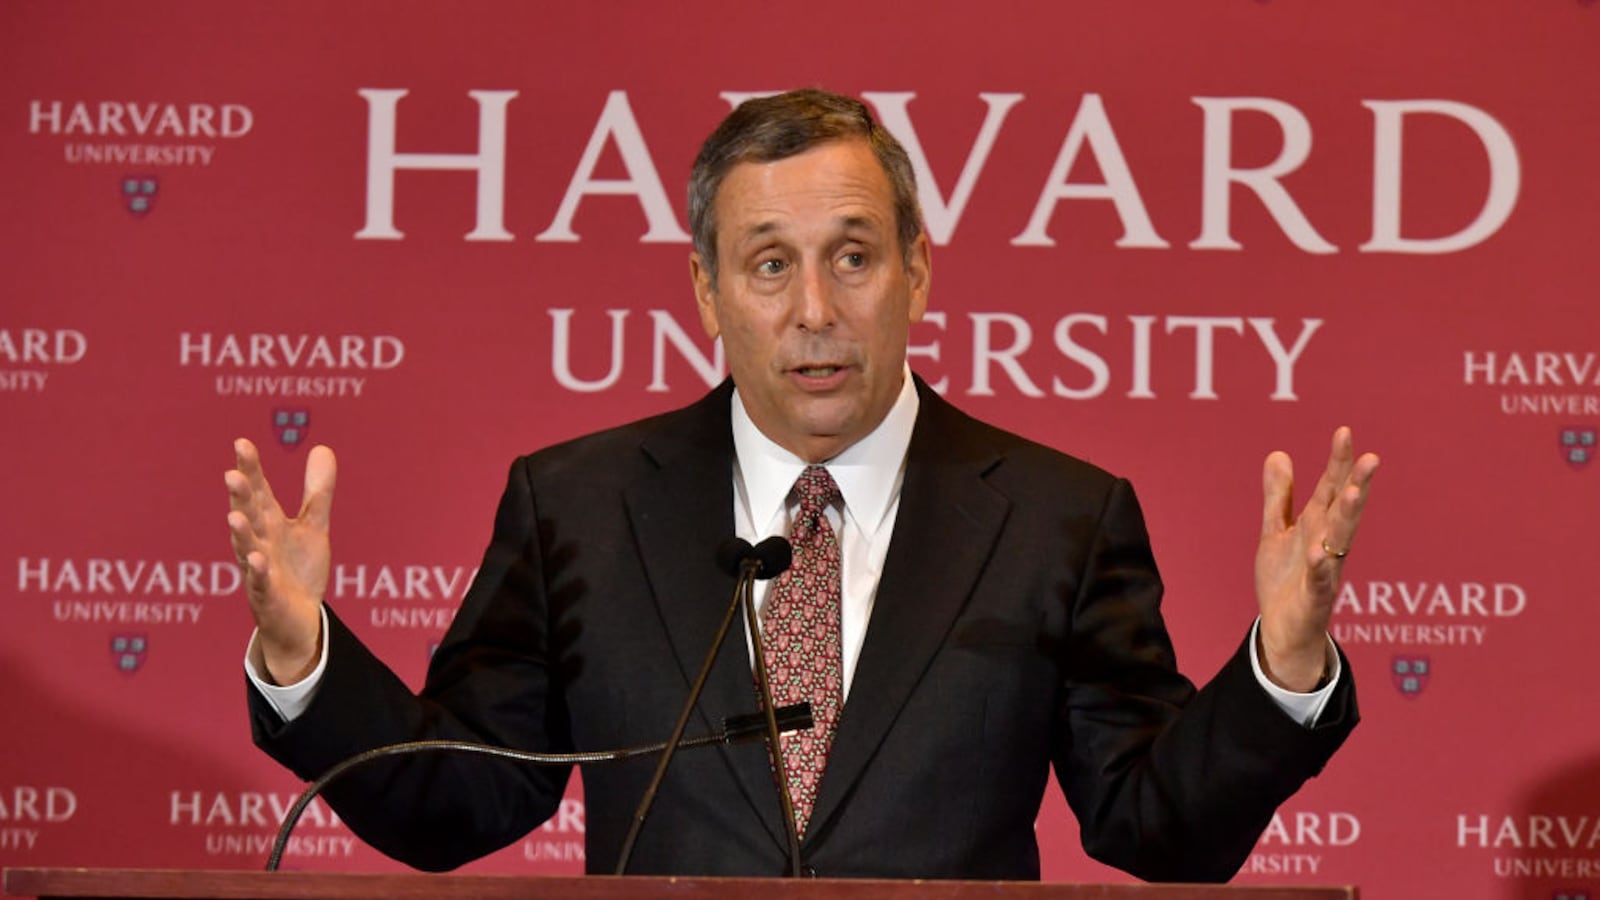 Lawrence Bacow became Harvard University's president in 2018.